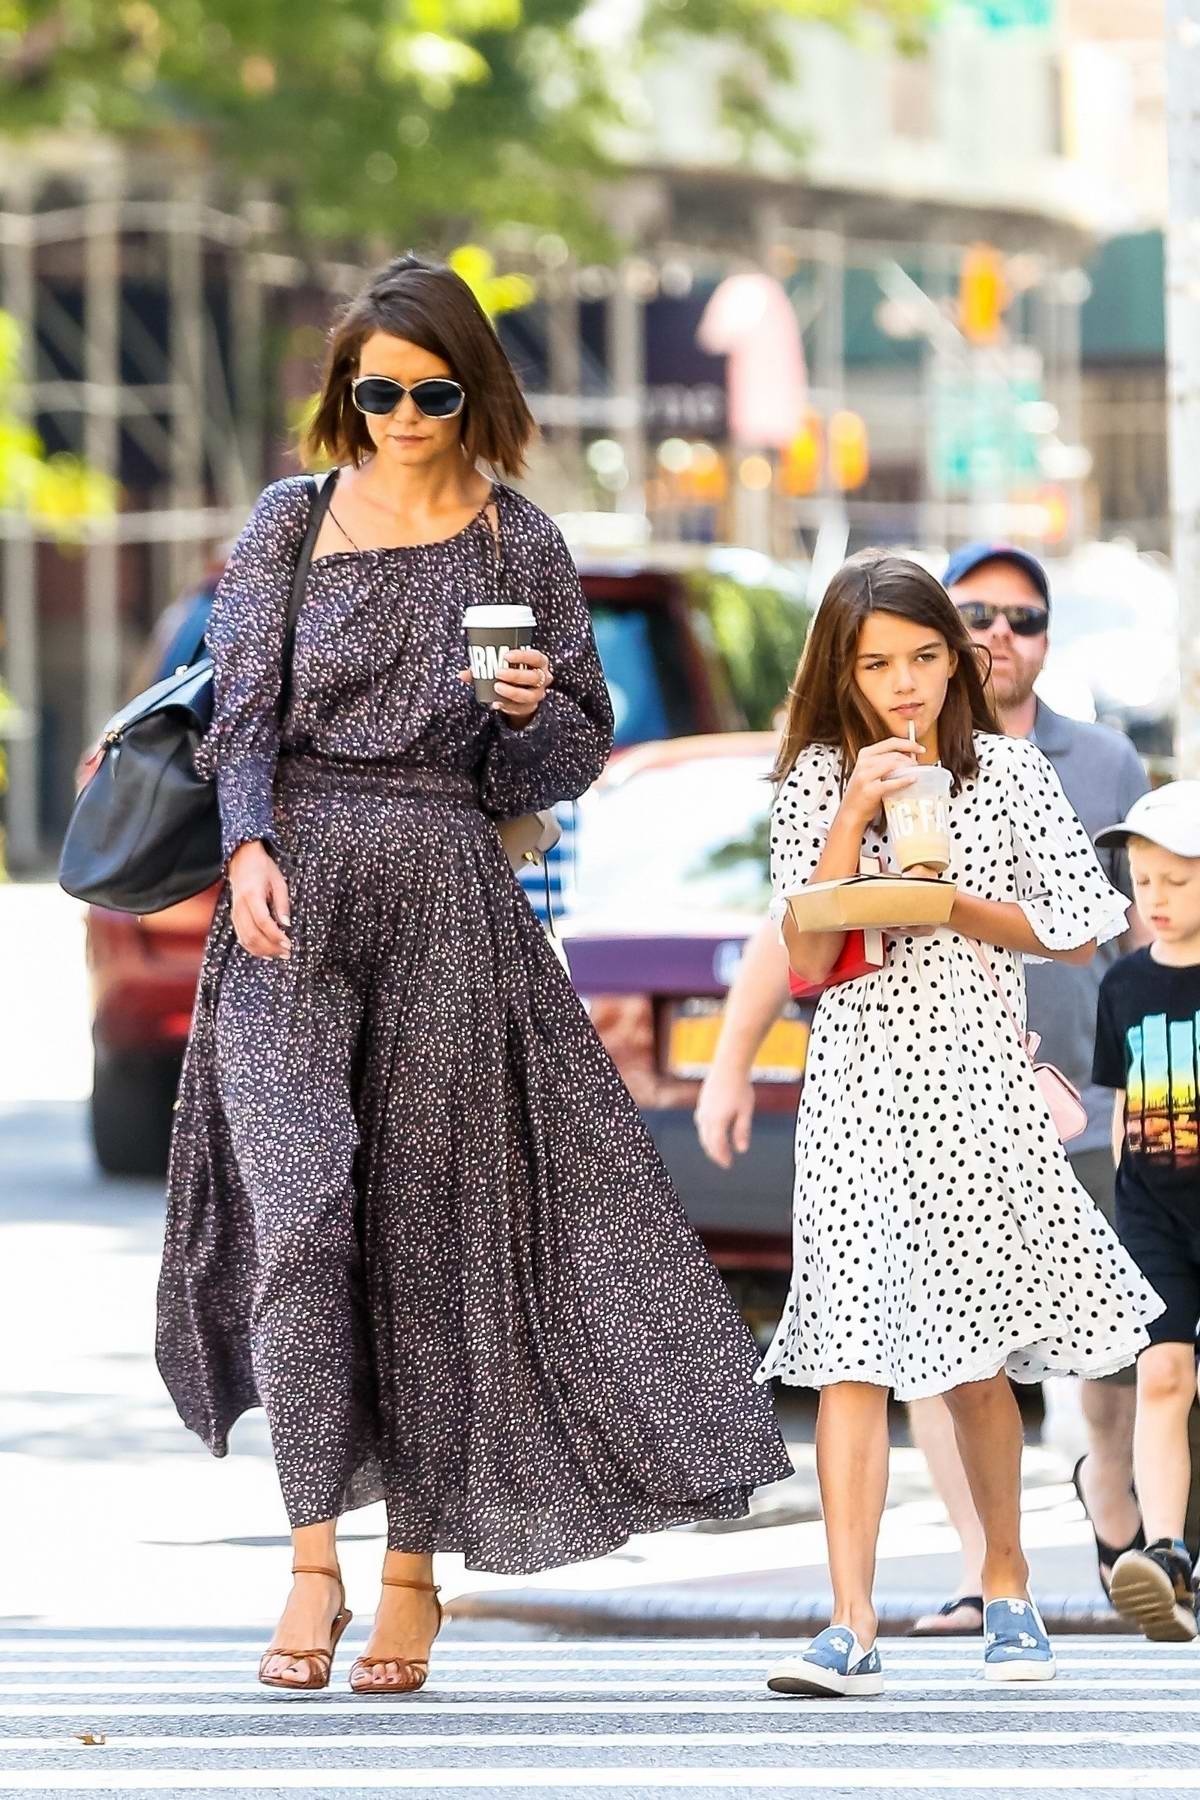 Katie Holmes And Daughter Suri Cruise Take A Walk After Breakfast In Soho New York City 300818 6